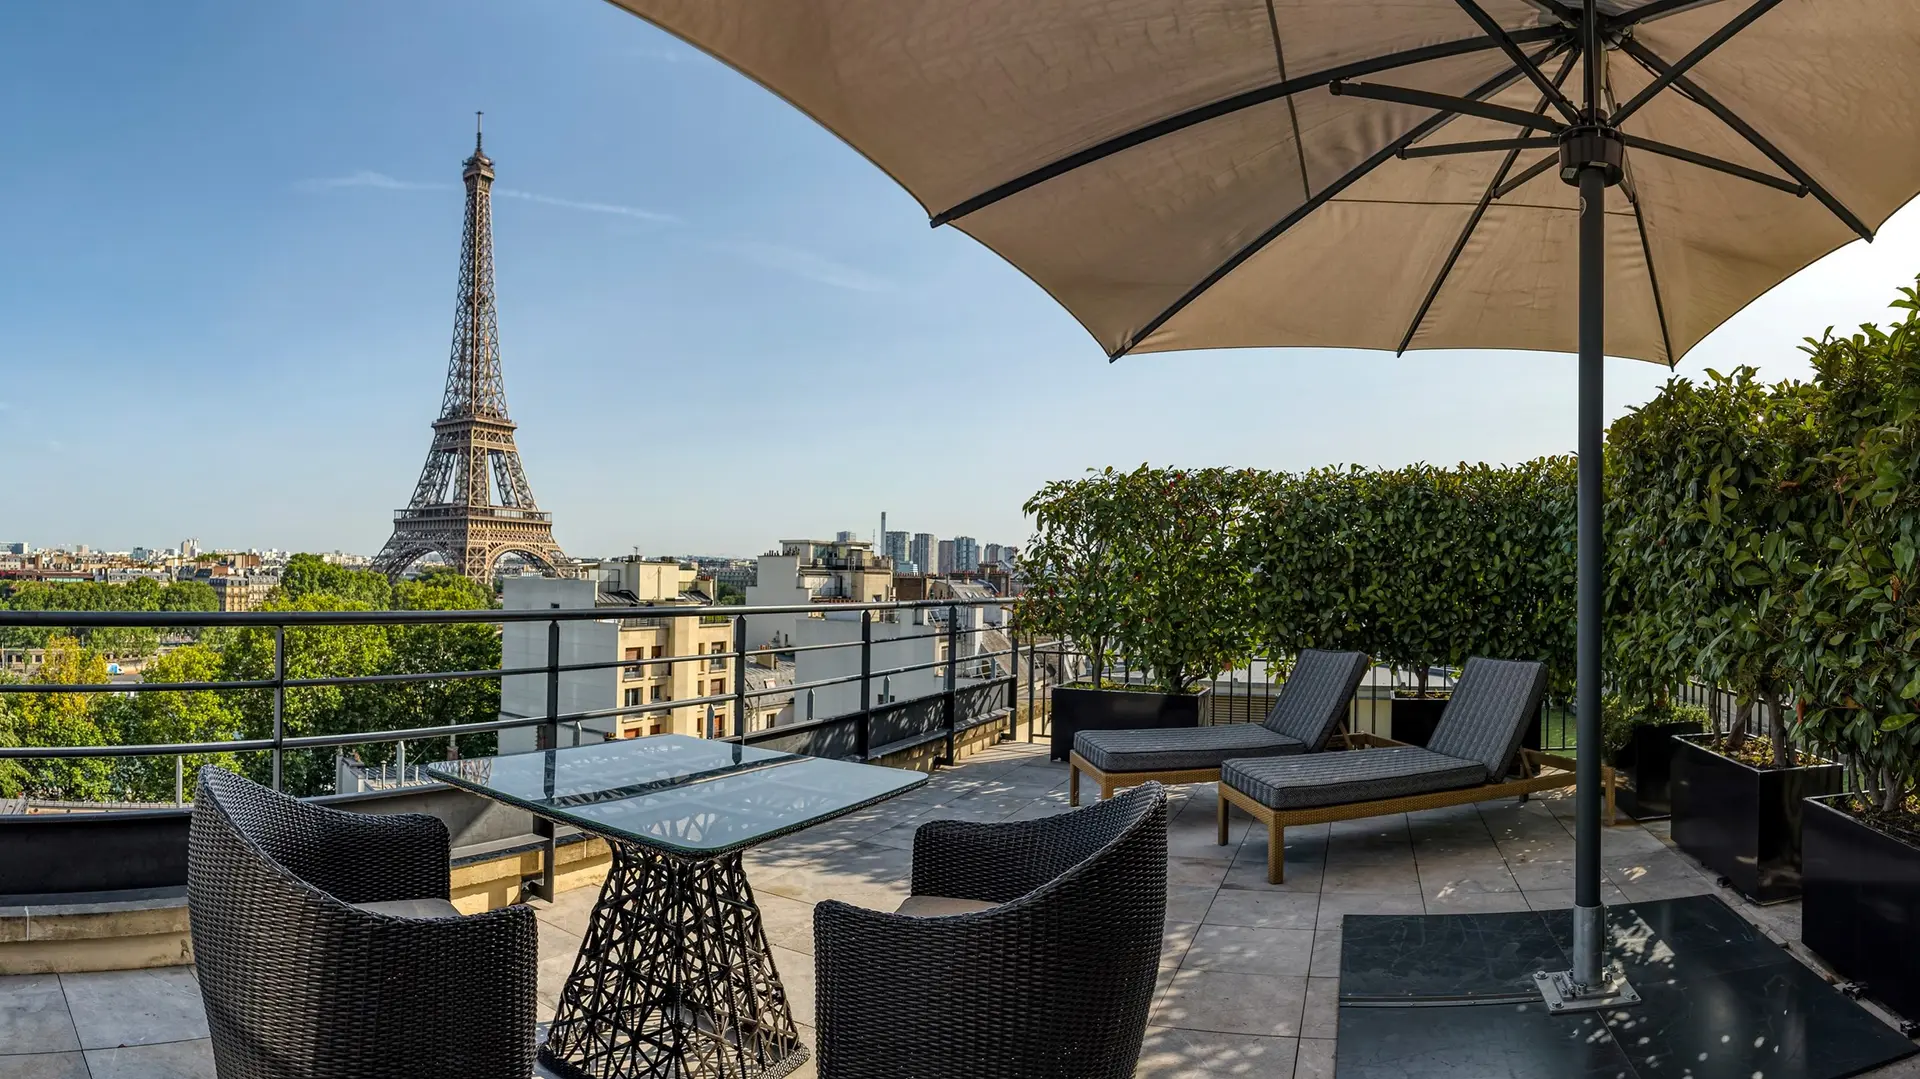 Outside terrace with sunbeds and table at shangri-la hotel paris